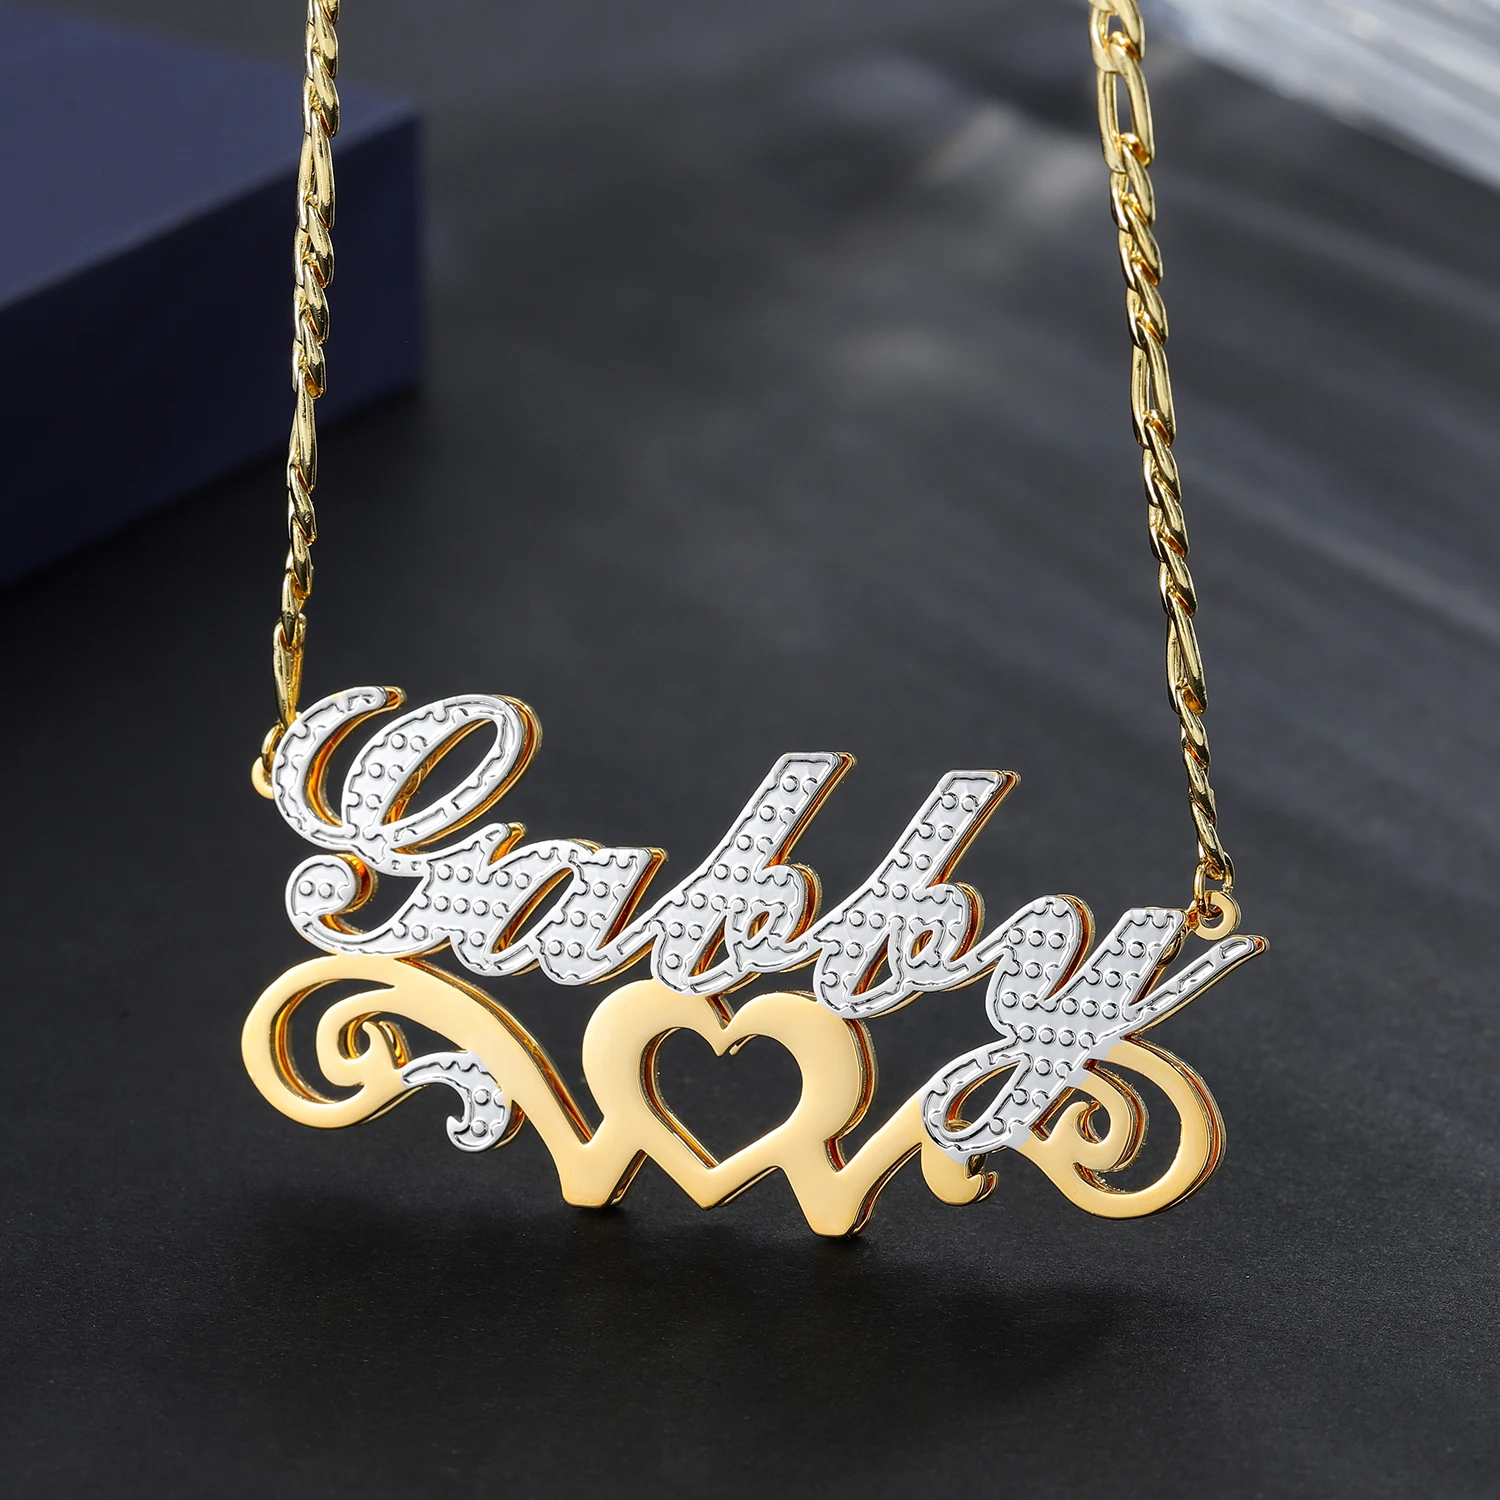 Customized Necklace Double Plated Heavenly Love Name Necklace For Women Name Plate Stainless Steel Name Pendant Charm Jewelry djivan gasparyan heavenly duduk 1 cd